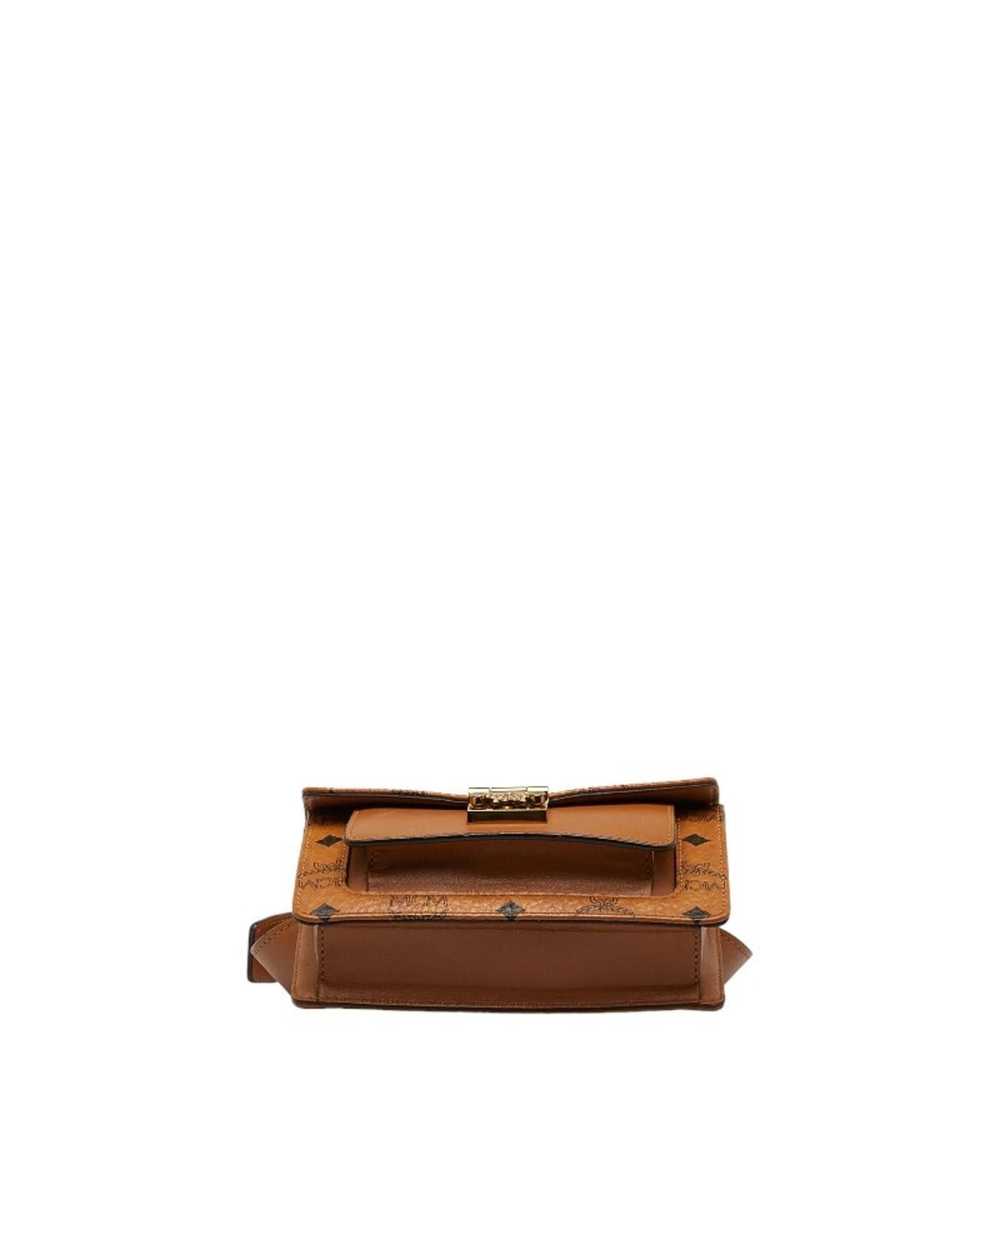 MCM Brown Leather Fanny Pack - image 4